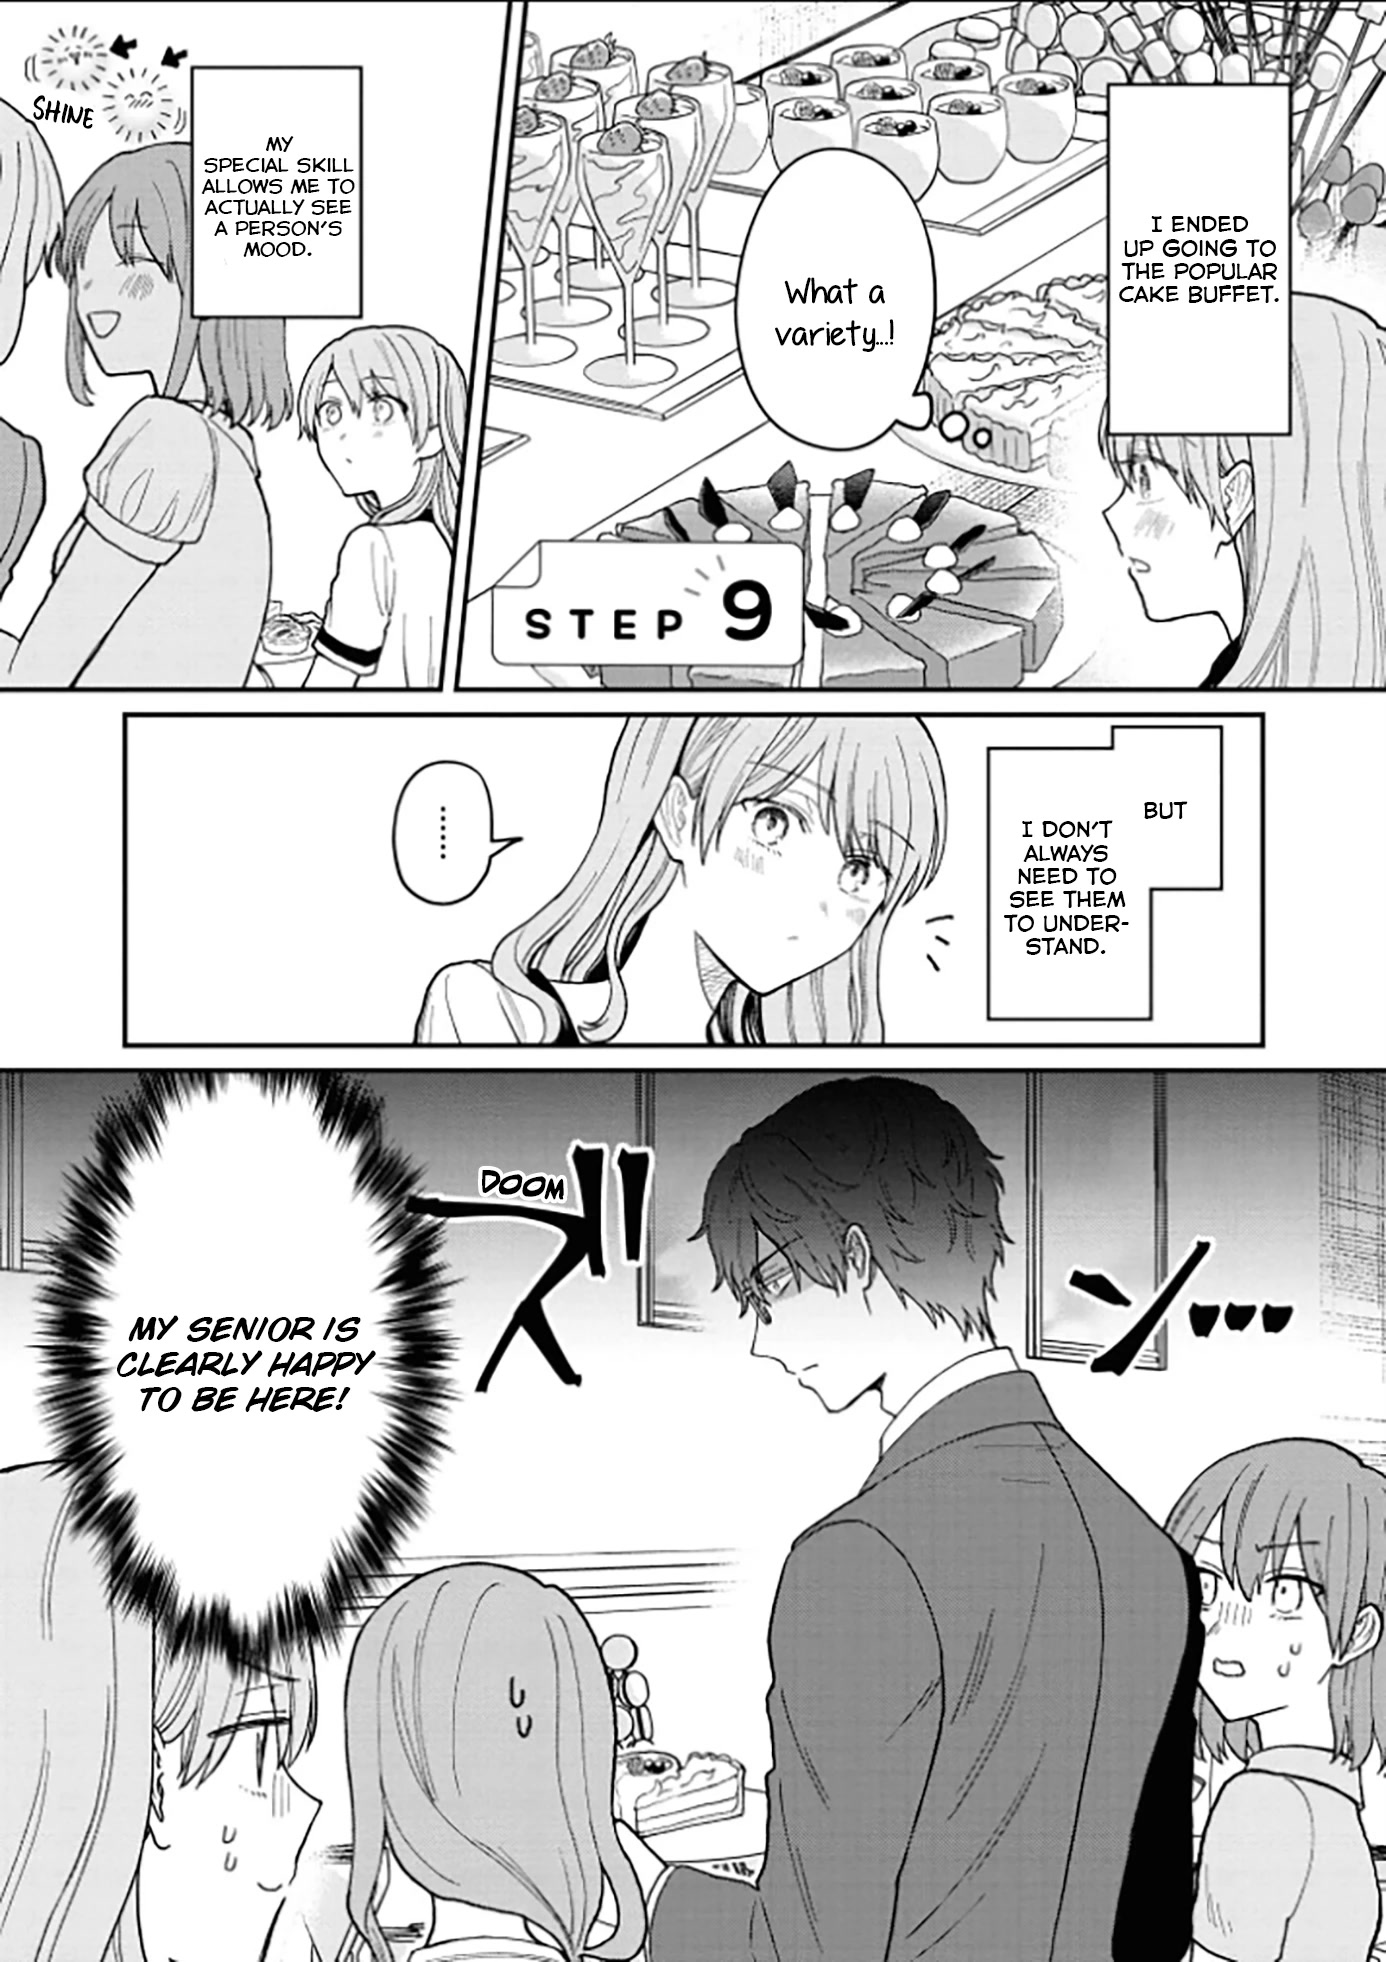 The New-Hire Who Could "Read" Emotions and the Unsociable Senpai - chapter 9 - #2